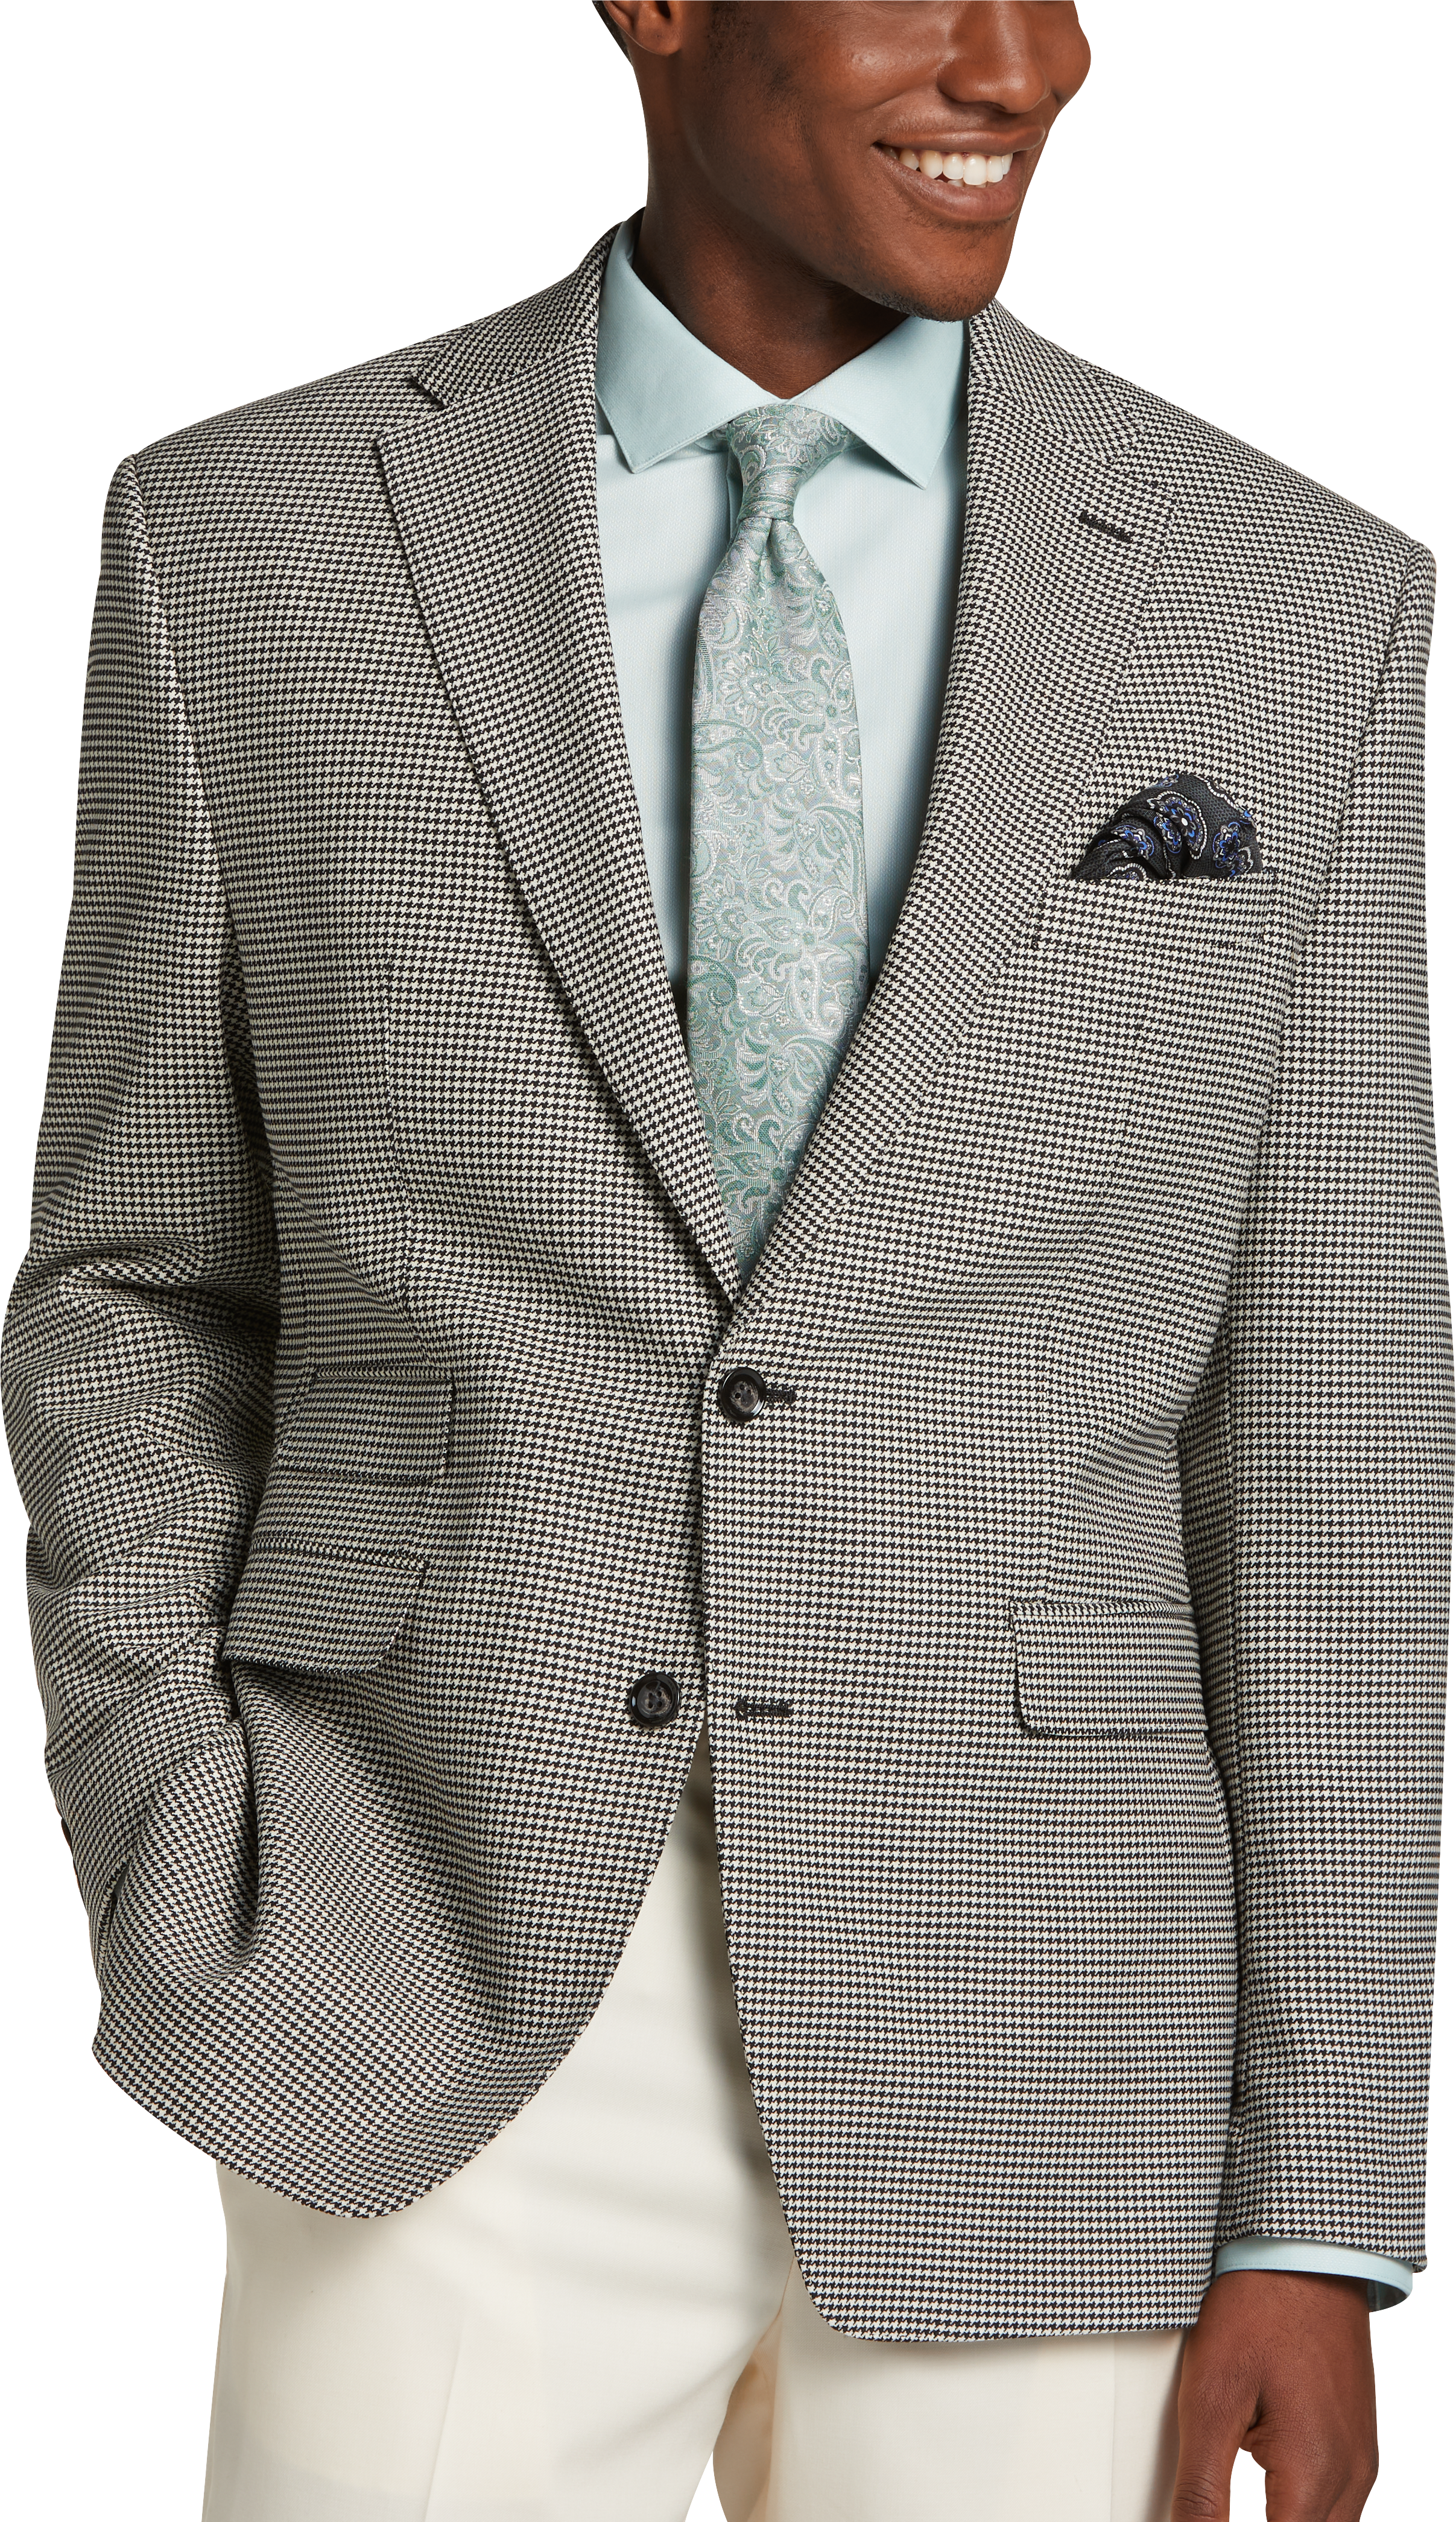 Tayion Classic Fit Suit Separates Coat, Black & White Houndstooth